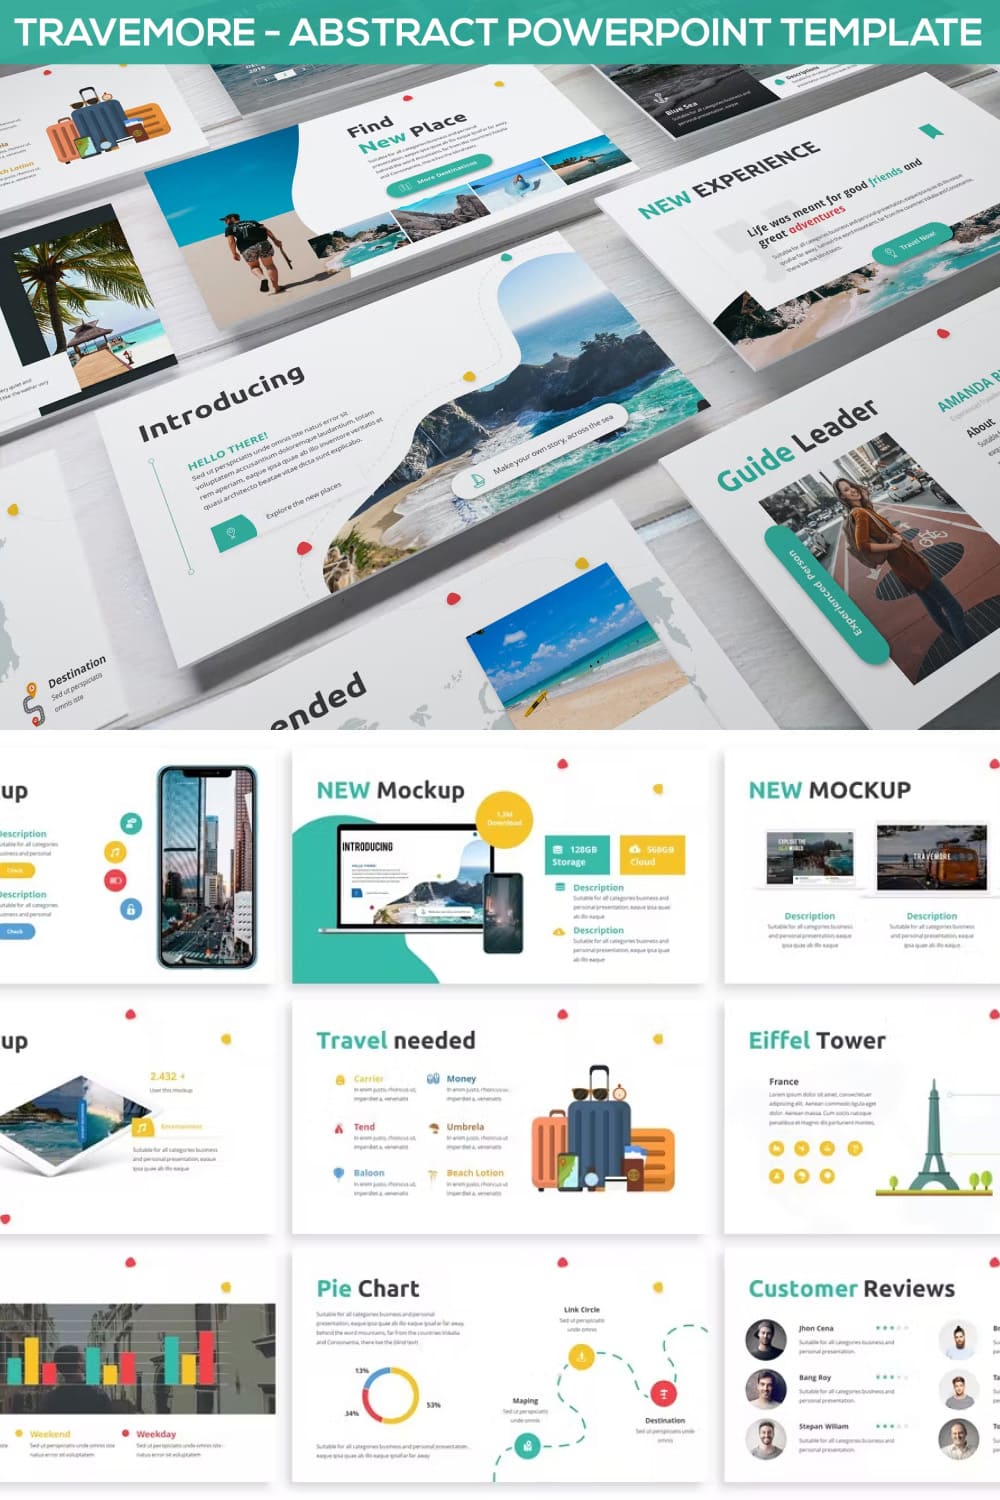 Travemore abstract powerpoint template - pinterest image preview.